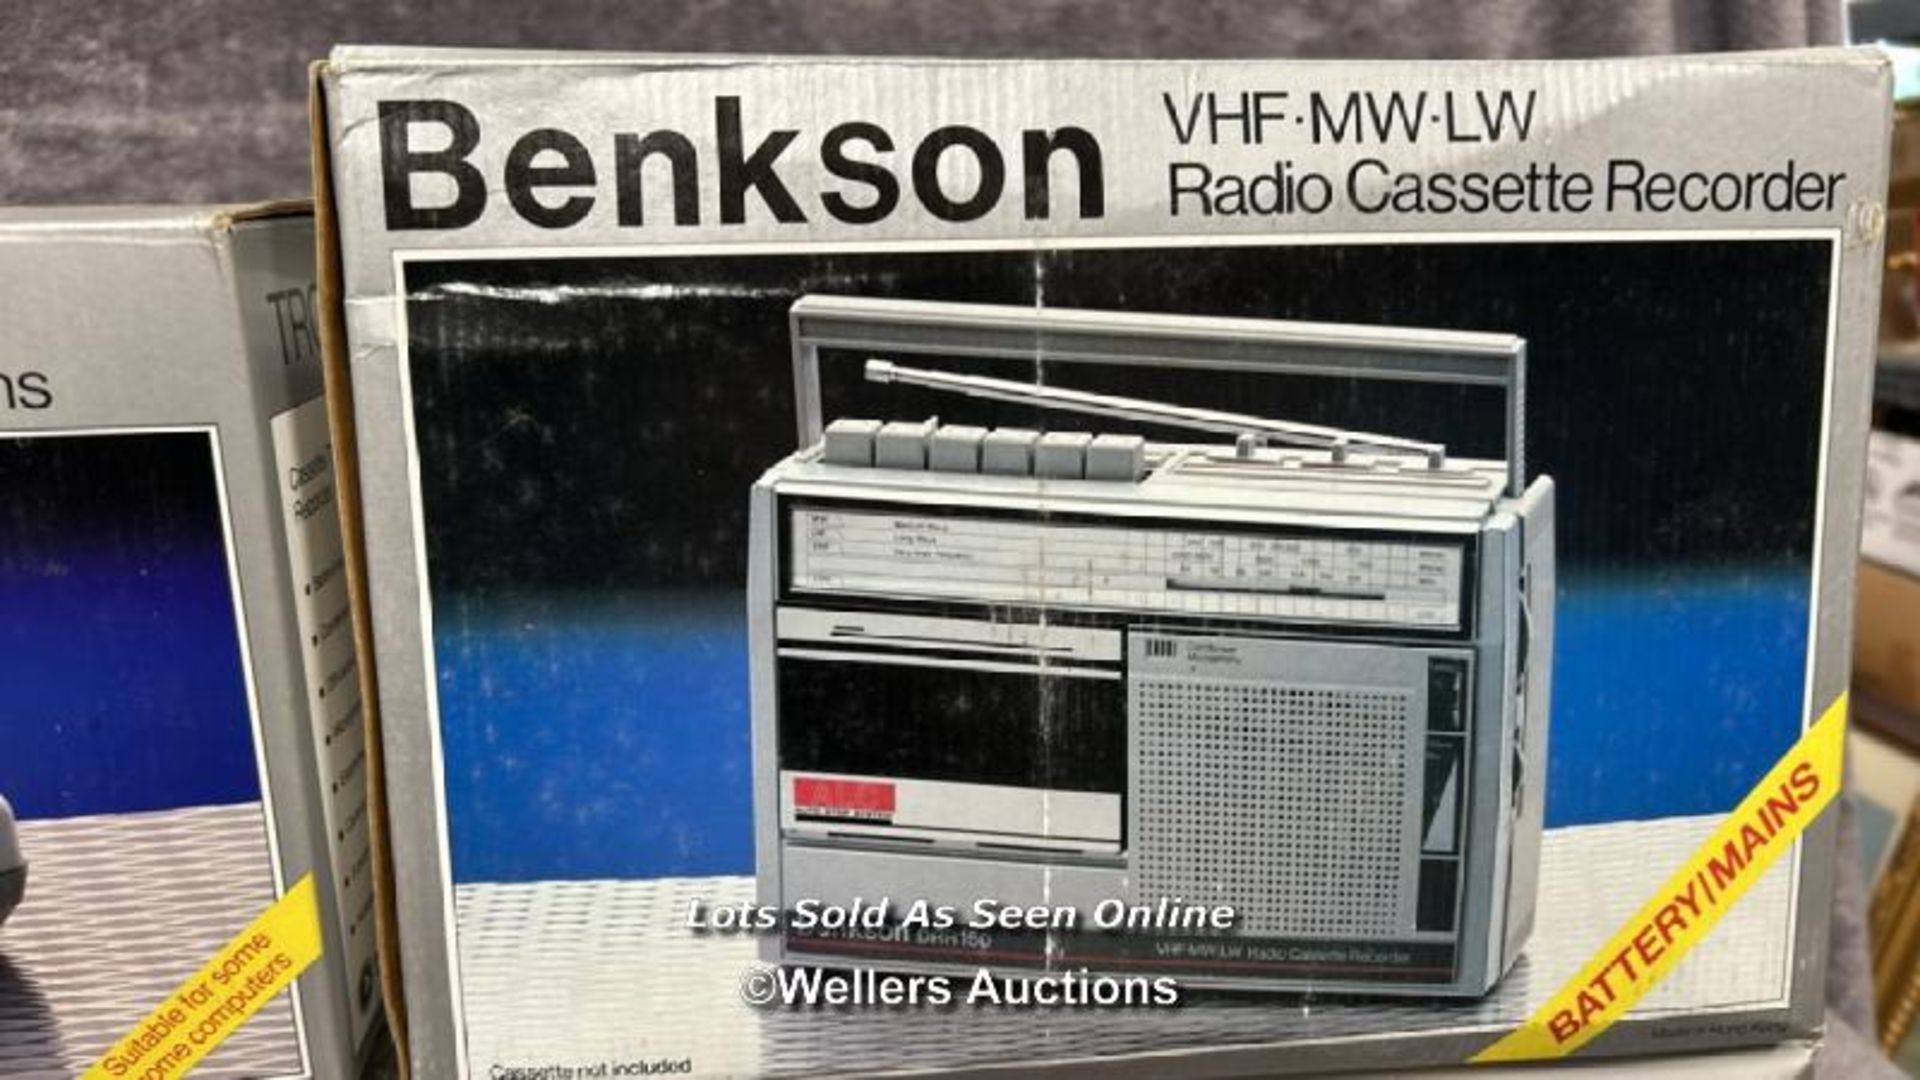 Four boxed Benkson cassette recorders and radios, from the private collection of the founder of - Image 5 of 5